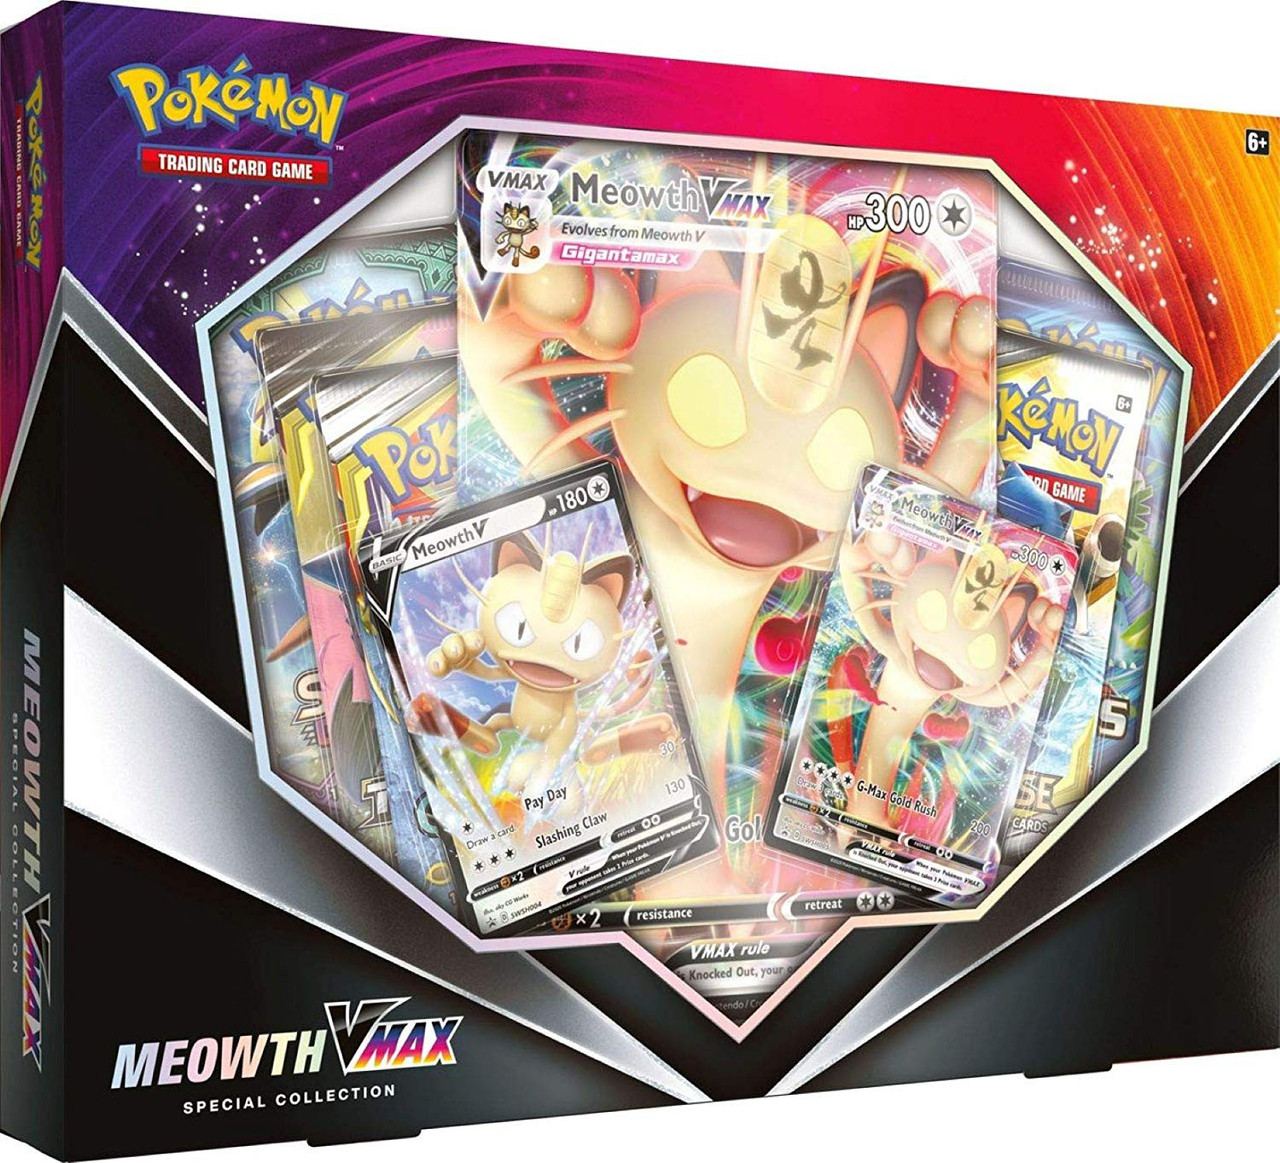 Pokemon Trading Card Game Meowth Vmax Special Collection 5 Booster Packs 2 Promo Cards Oversize Card Pokemon Usa Toywiz - endo 01 shirt roblox